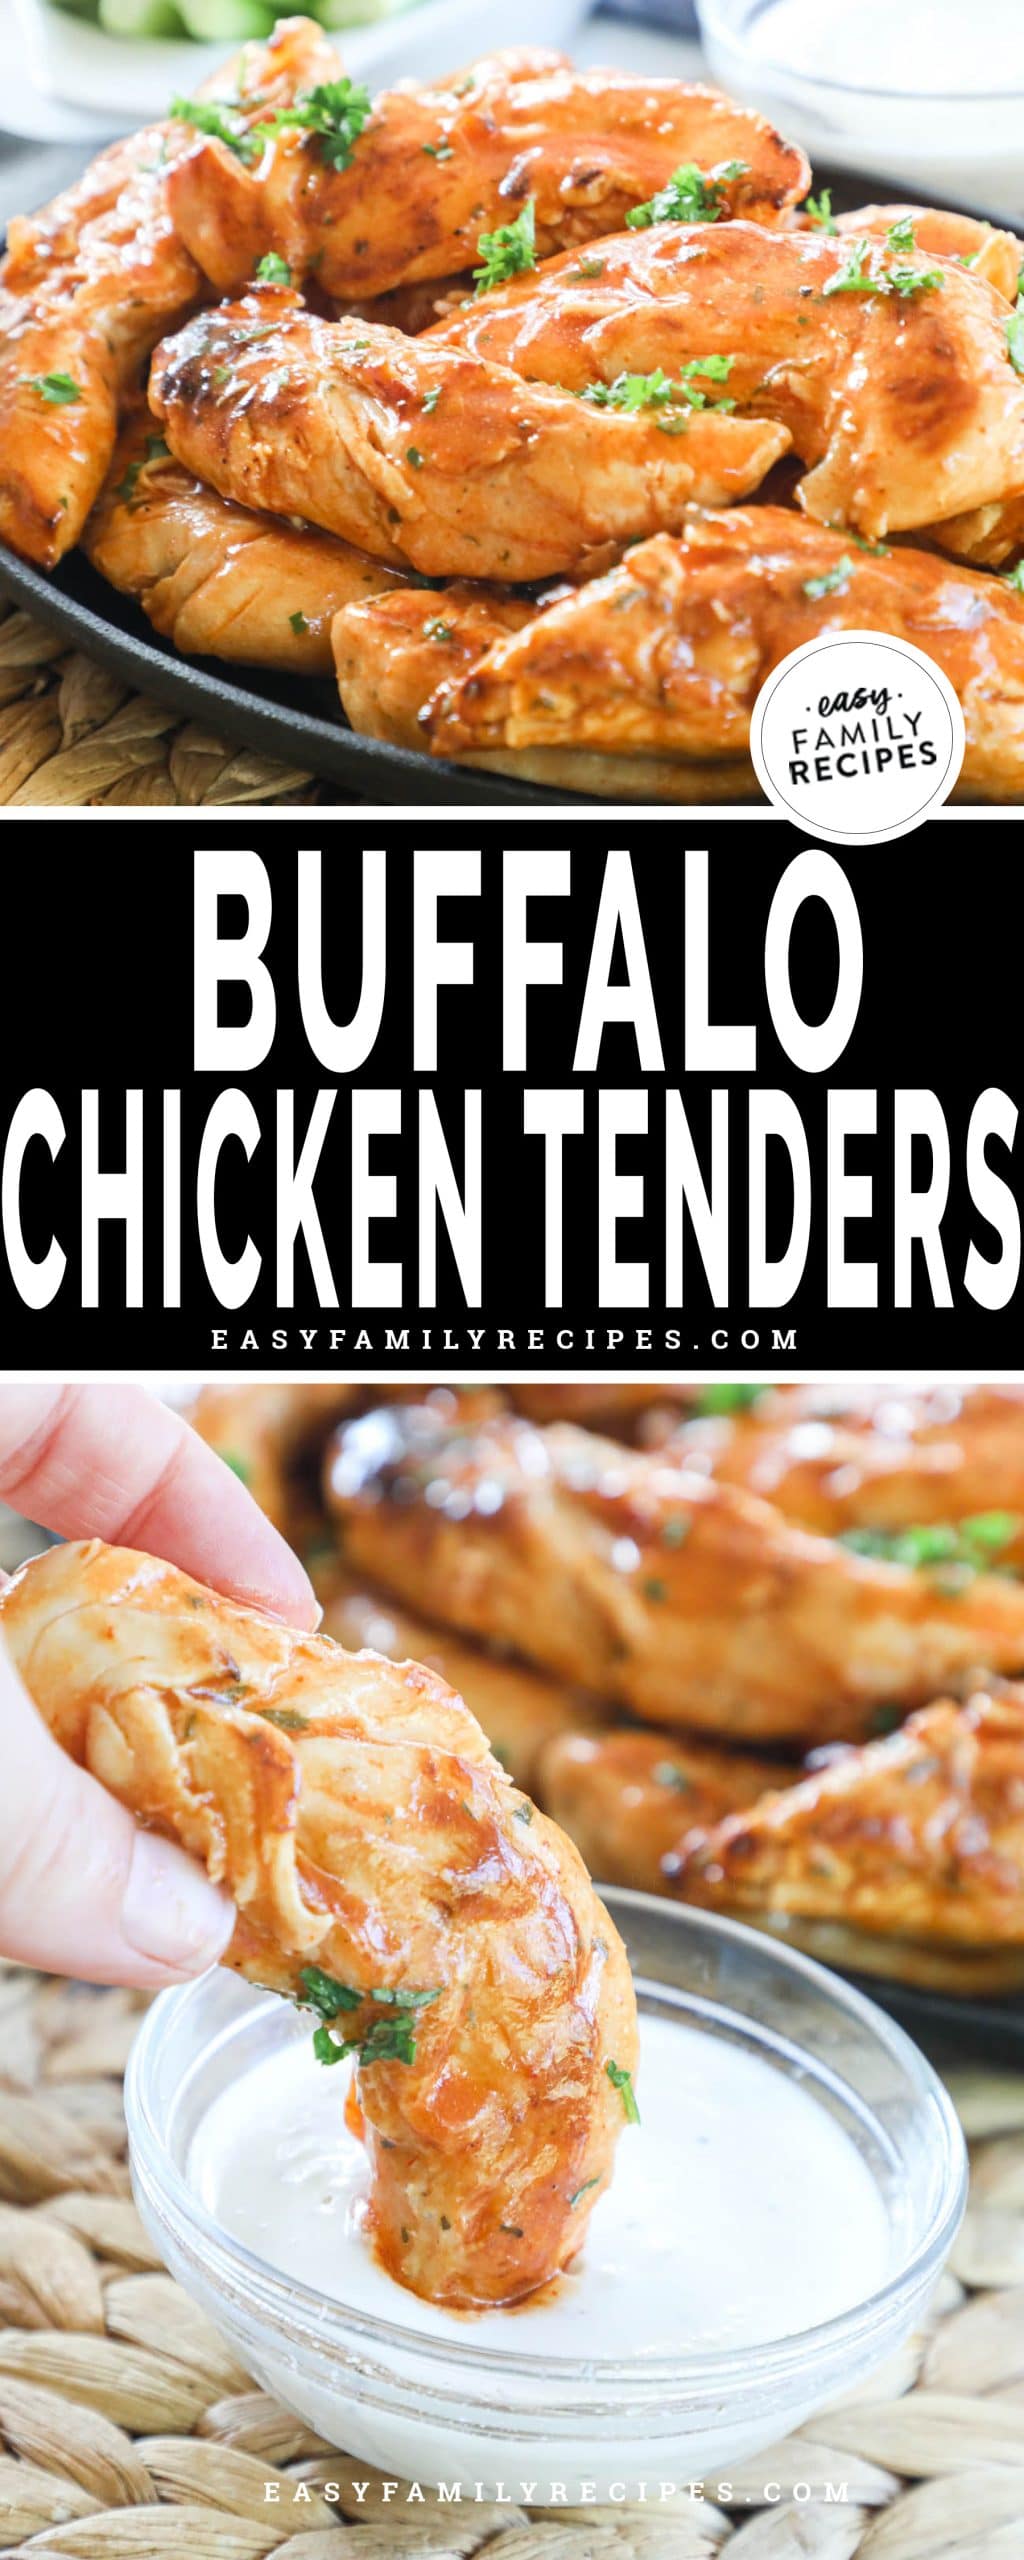 saucy buffalo chicken tenders dipped in ranch dressing